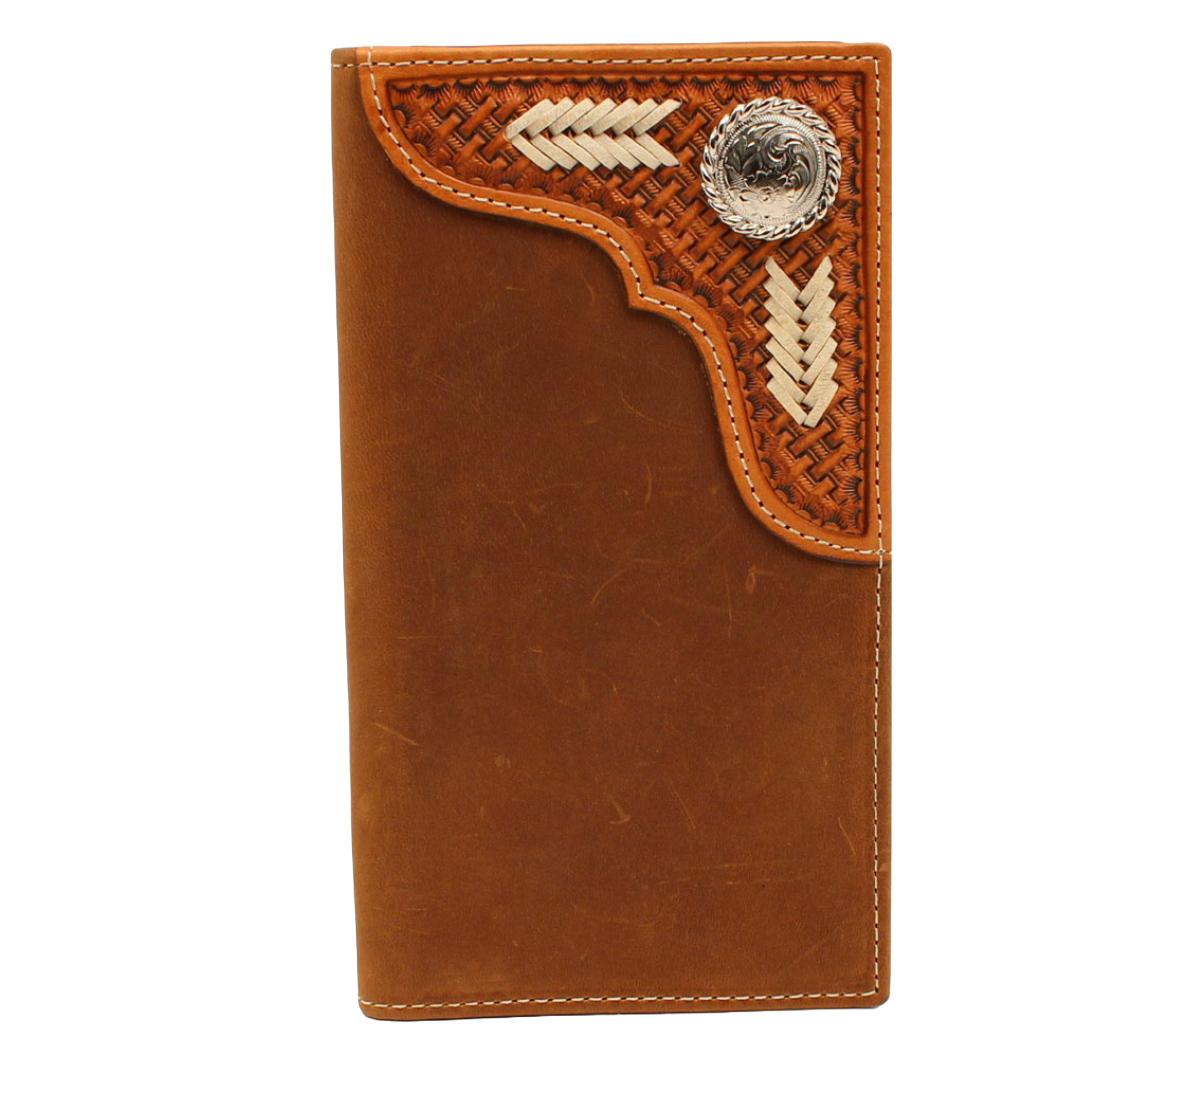 M&F Western Circle Concho Tan Brown Leather Rodeo Wallet N500003844